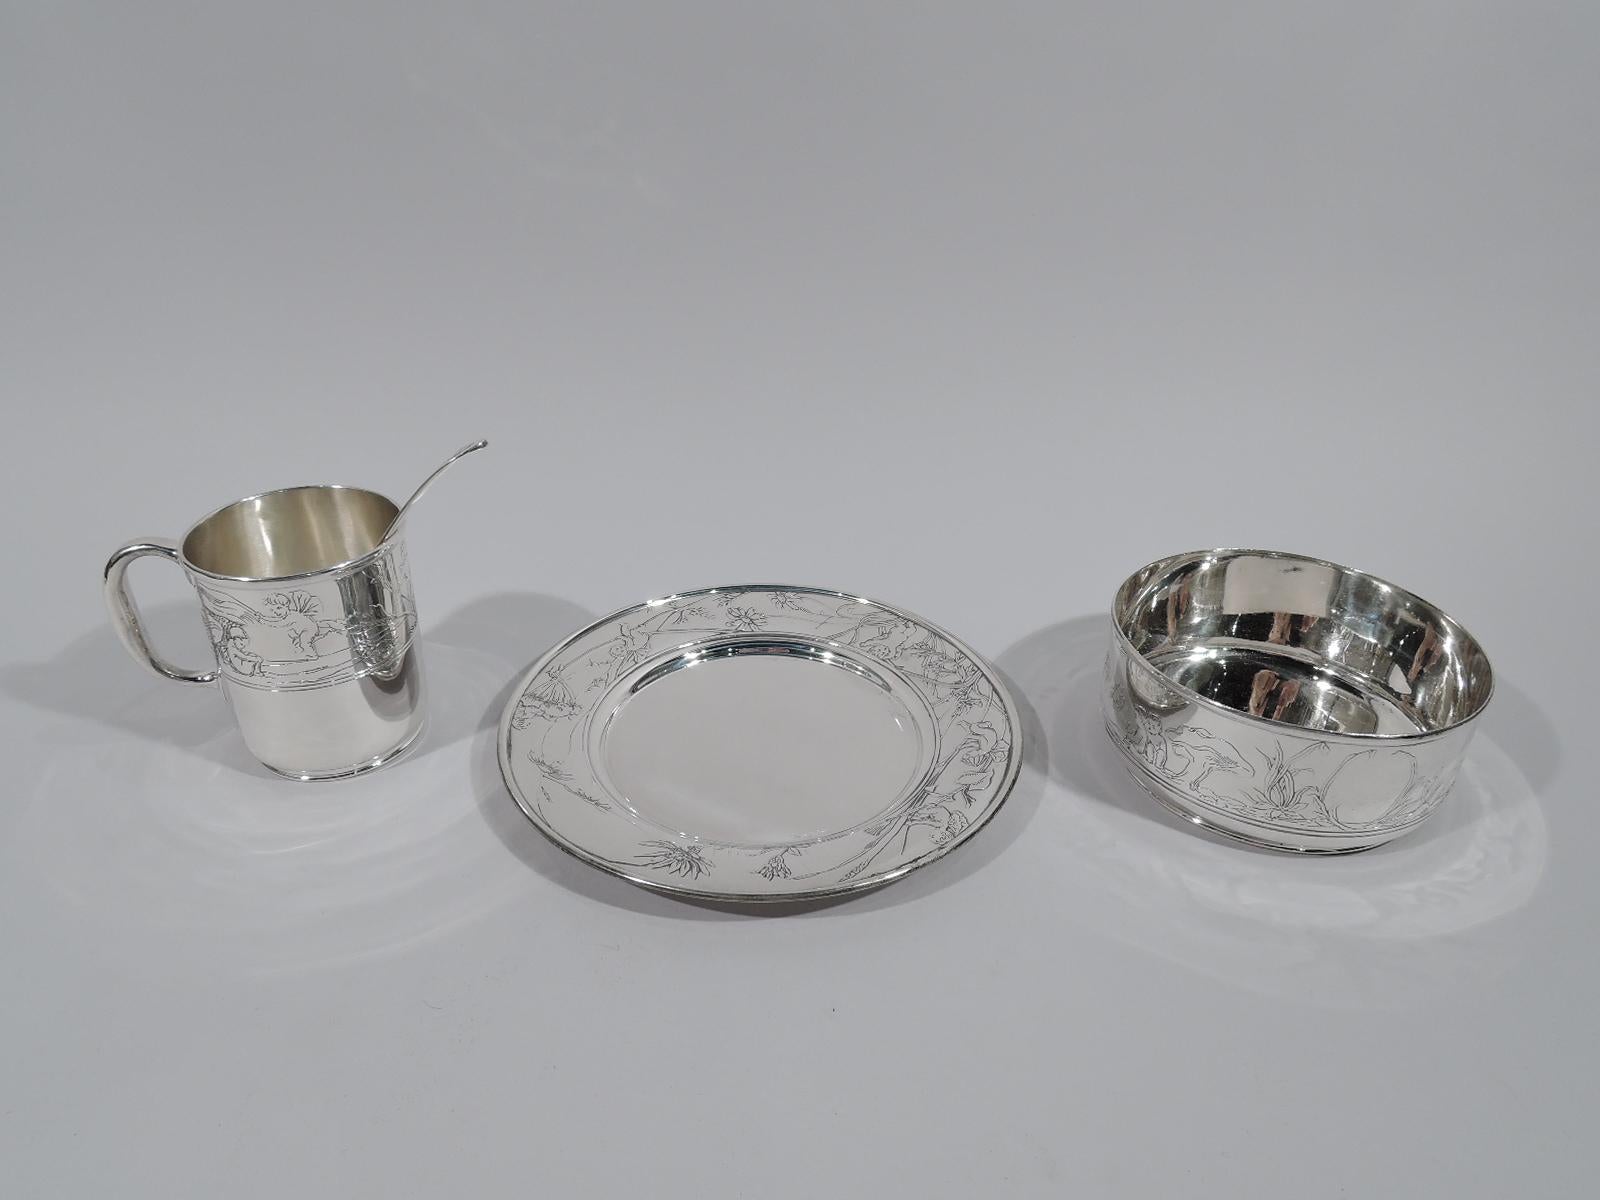 Art Nouveau sterling silver baby set. Made by Tiffany & Co. in New York, circa 1909. This set comprises cup, bowl, plate, and spoon. Acid-etched ornament in form of winged and cherubic fairies frolicking amidst giant mushrooms and aquatic grasses.